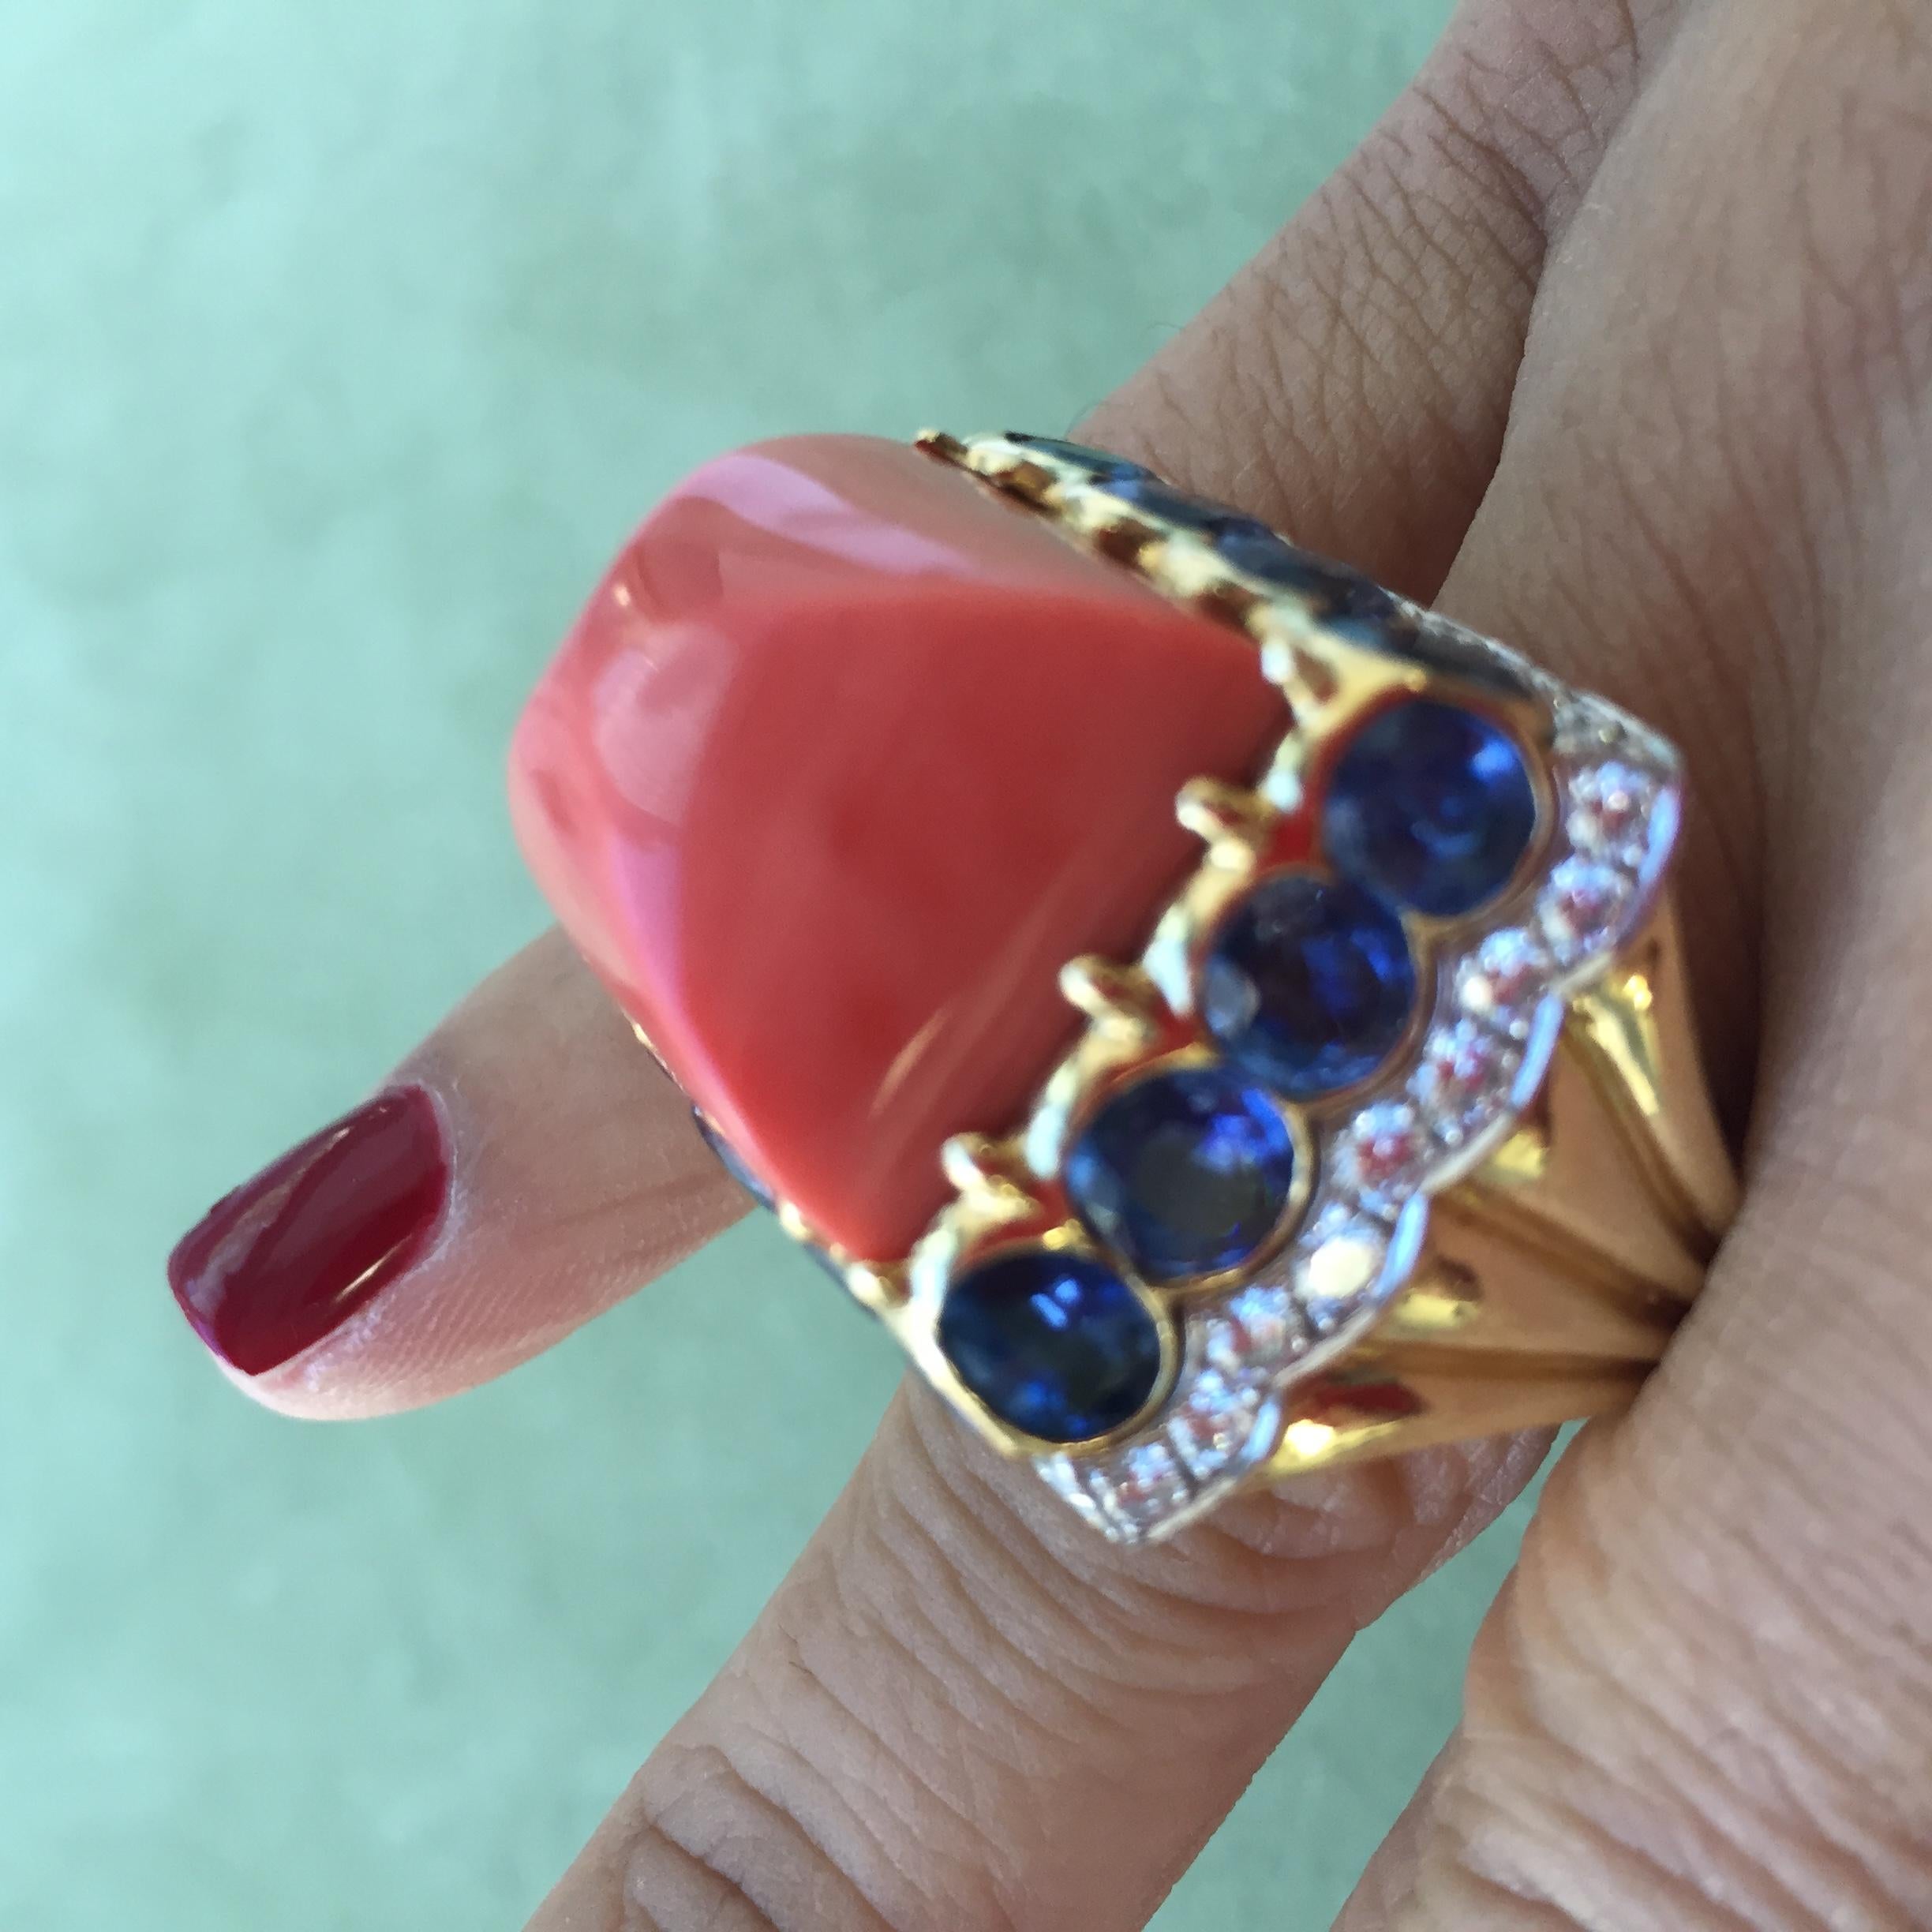 A ring featuring approximately 1.75 carats of diamonds, 11.35 carats of sapphires and sugarloaf coral set in 18k gold and platinum, signed David Webb.

with certificate of authenticity